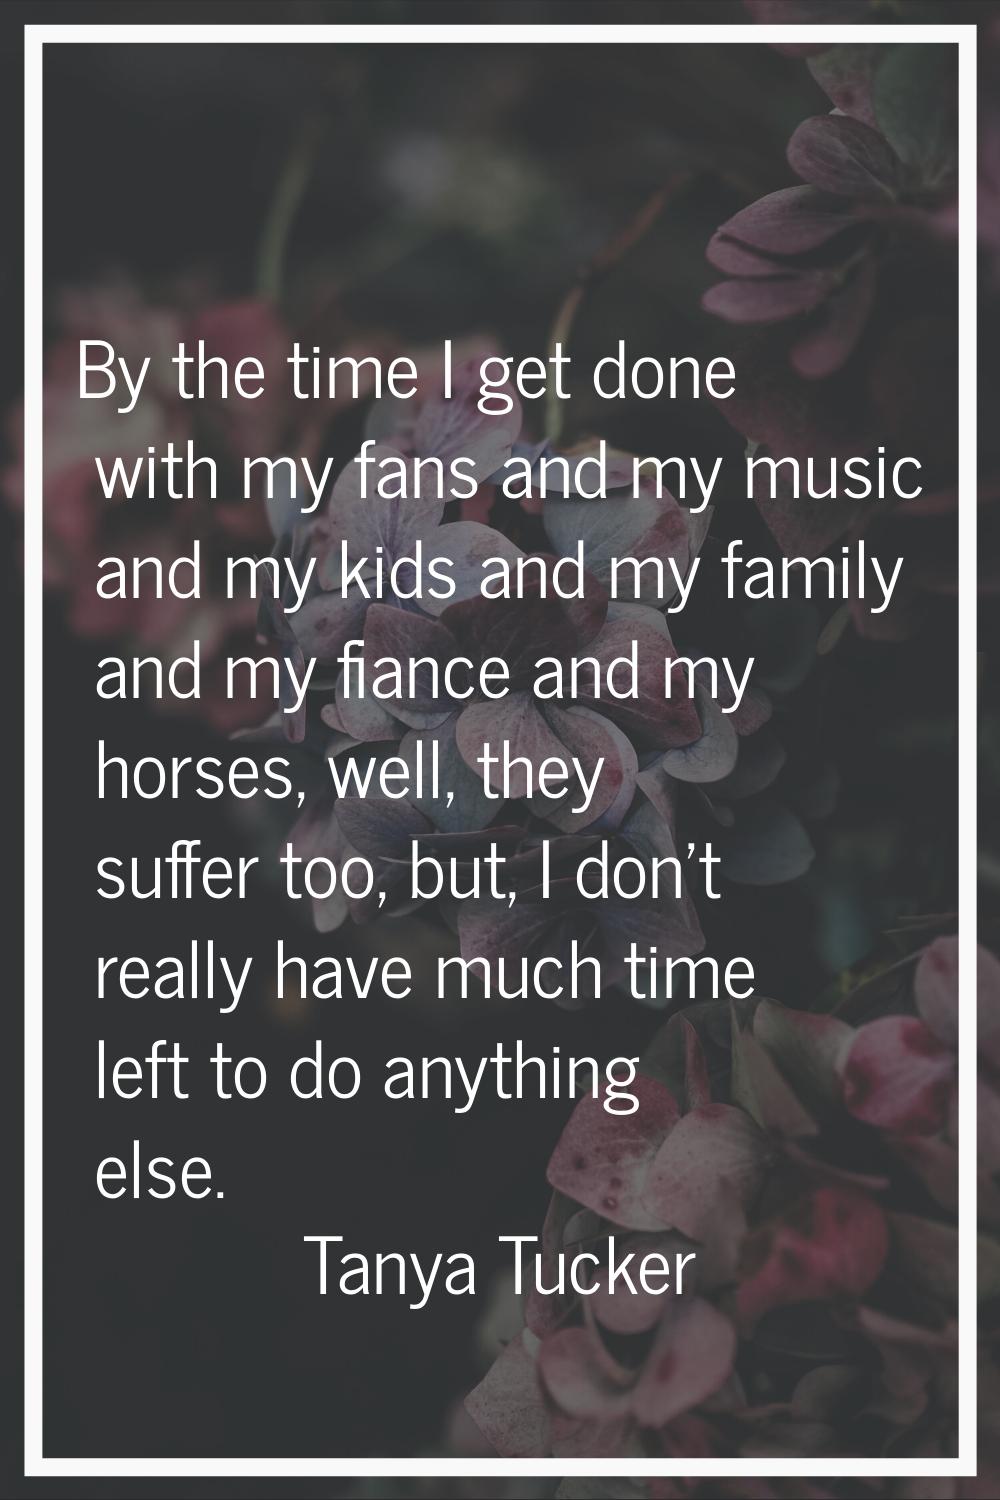 By the time I get done with my fans and my music and my kids and my family and my fiance and my hor